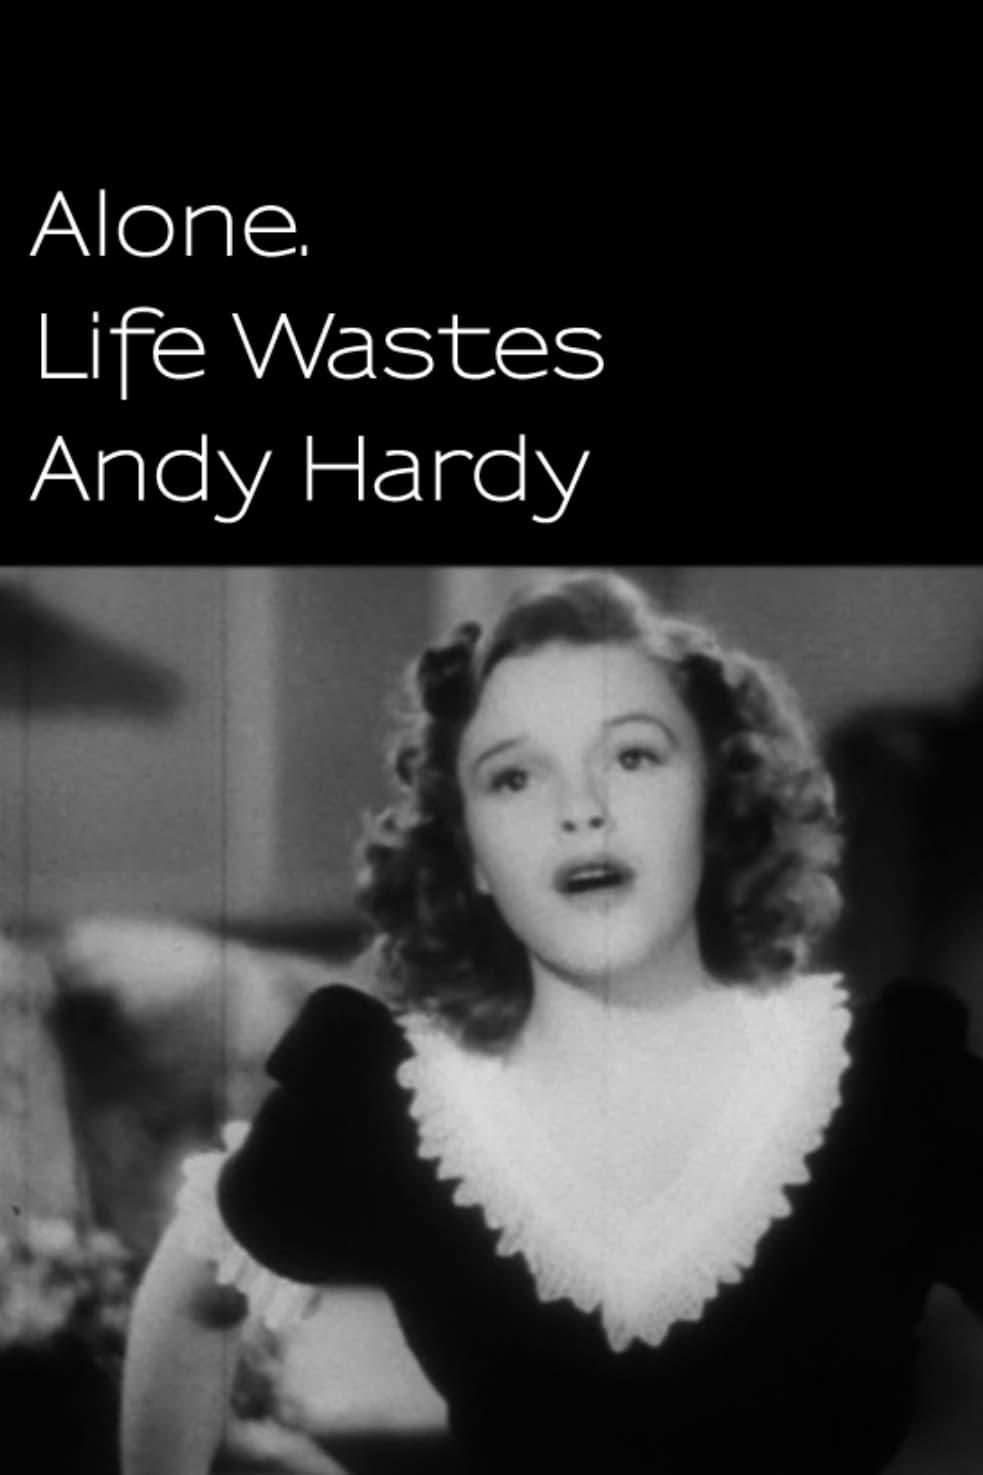 Alone. Life Wastes Andy Hardy poster